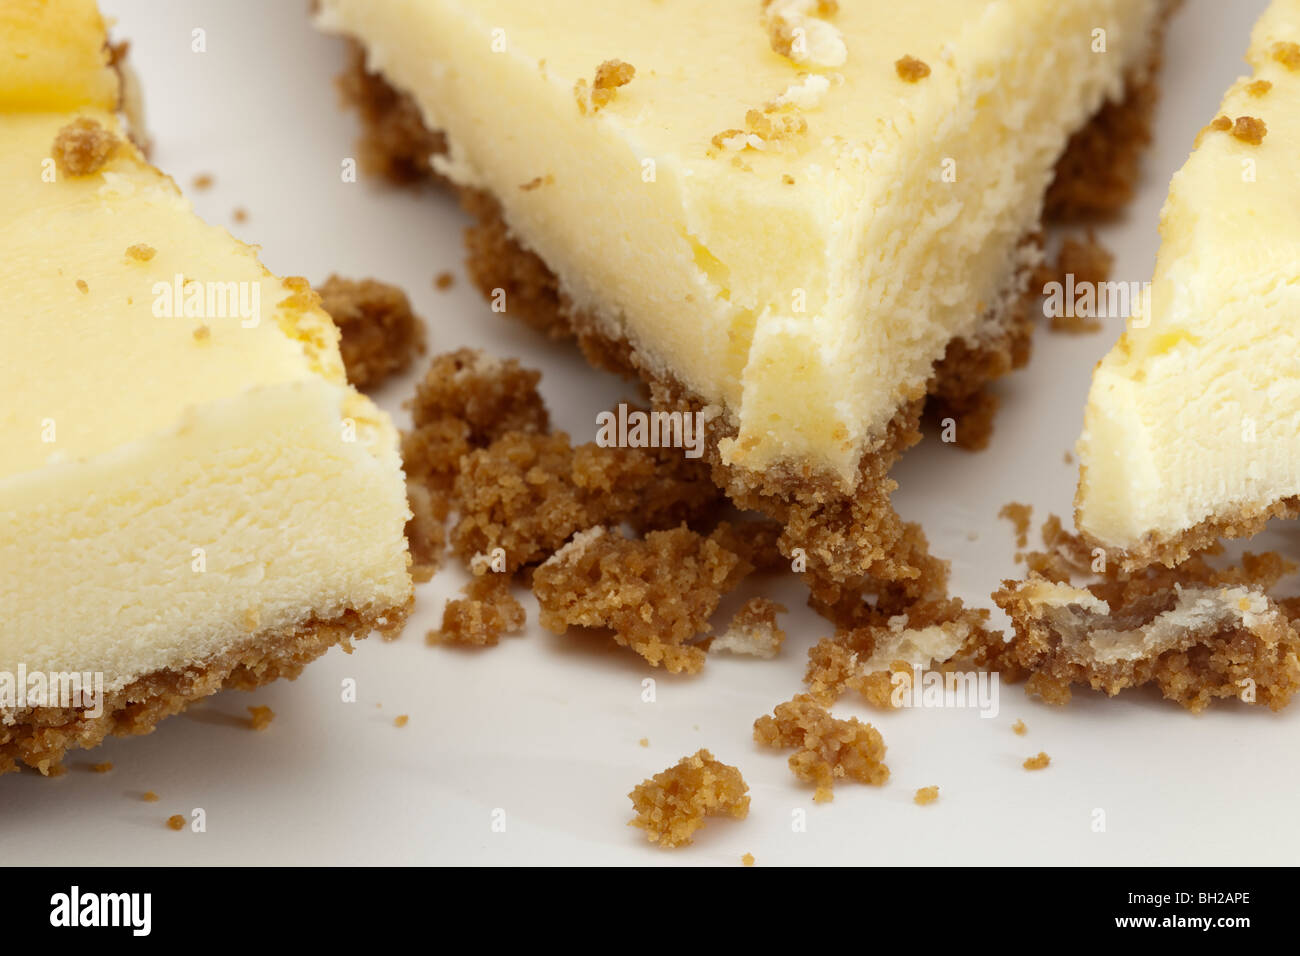 Close up of biscuit crumb on sliced cheesecake Stock Photo